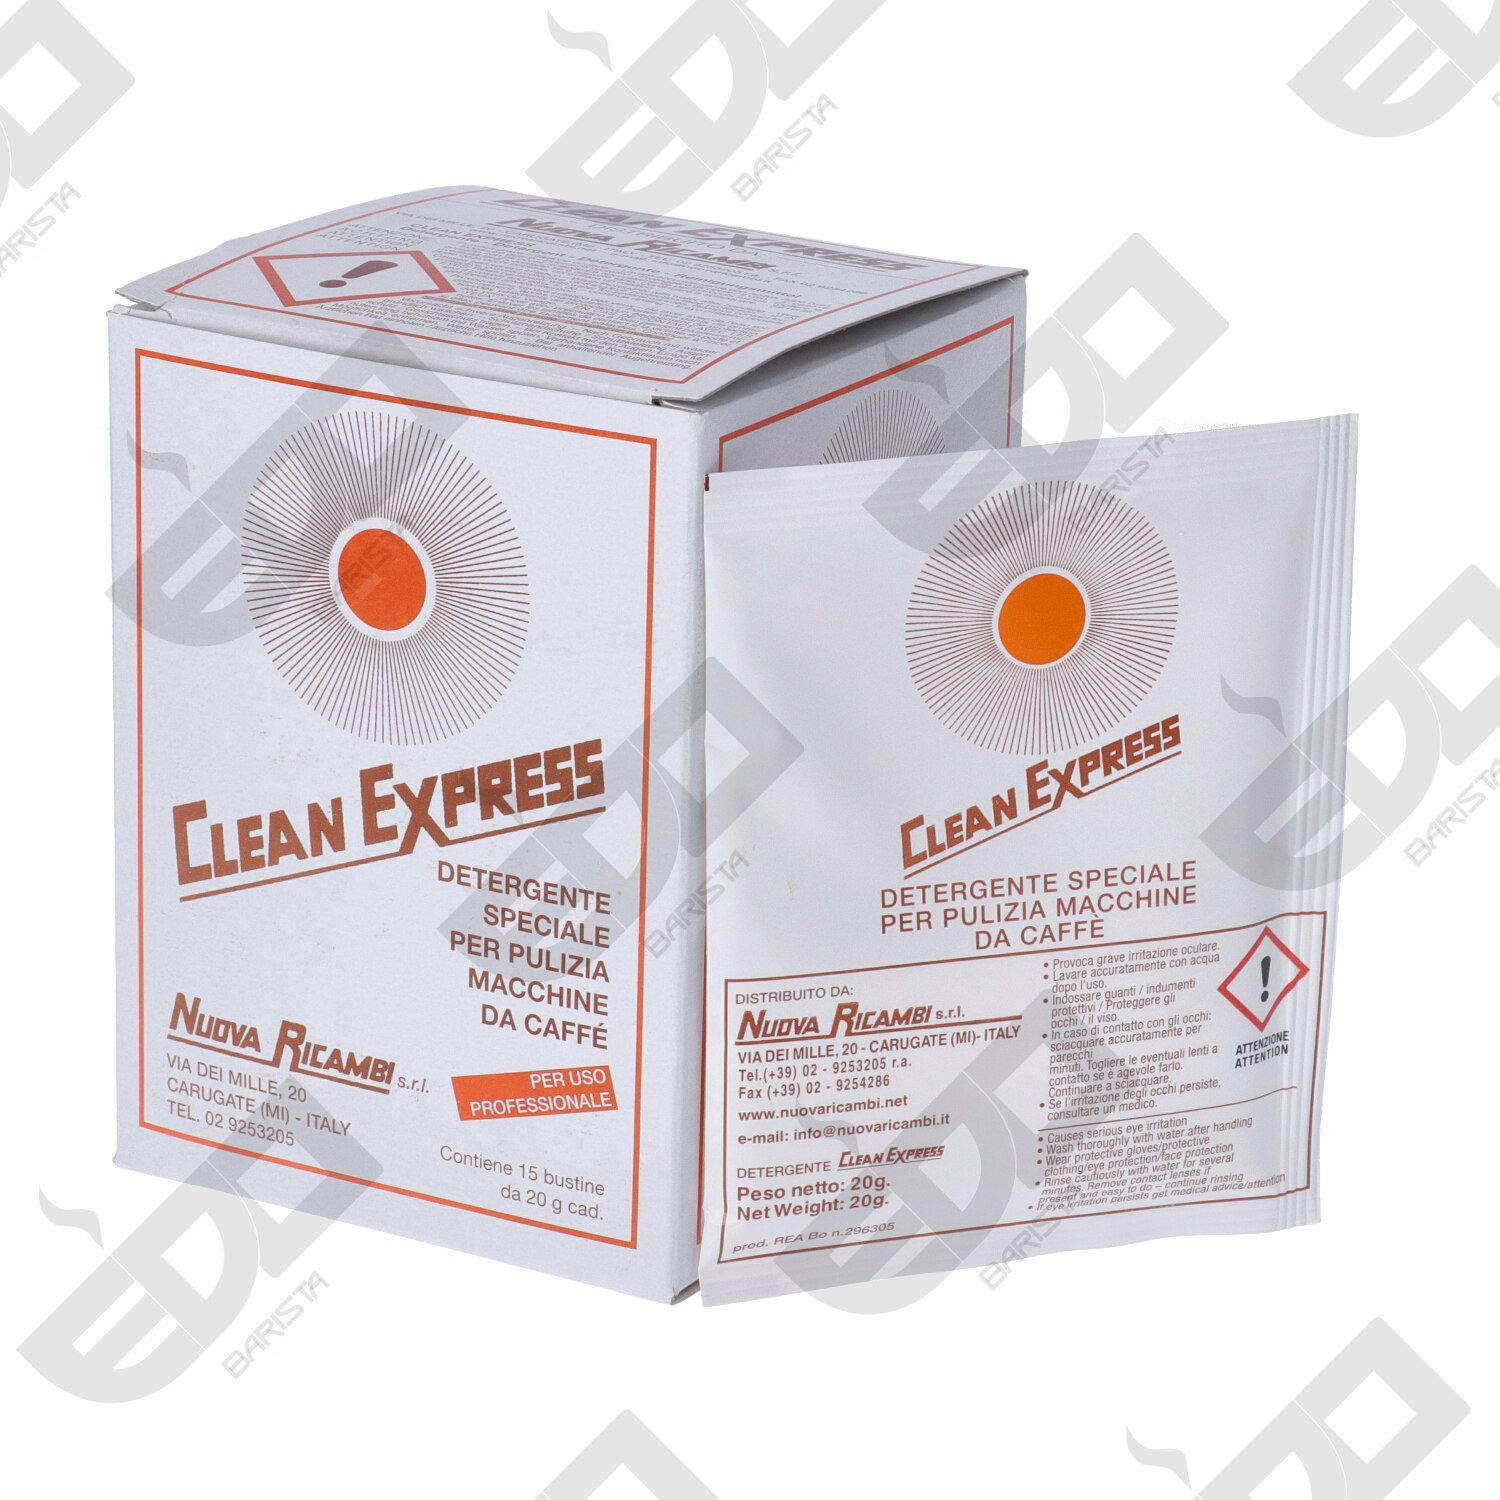 BOX OF CLEAN EXPRESS OF 15 single-dose sachets 